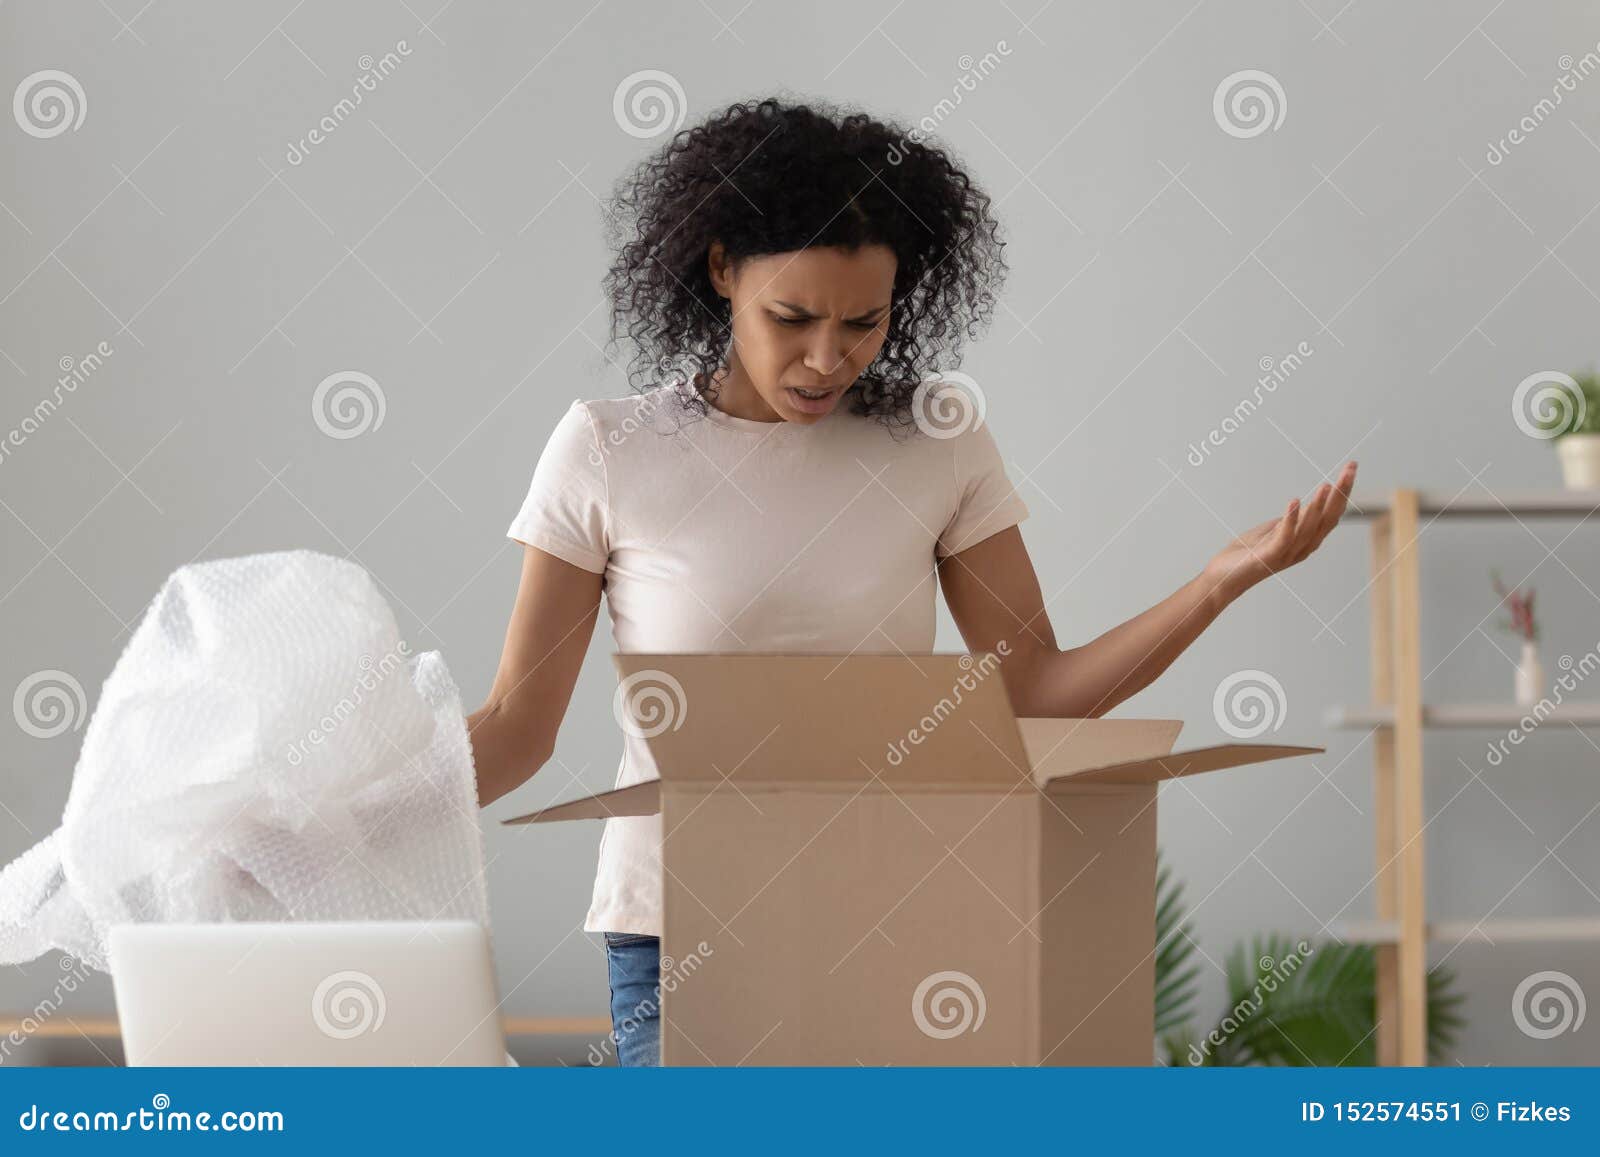 disappointed shocked african woman open cardboard box receive bad parcel